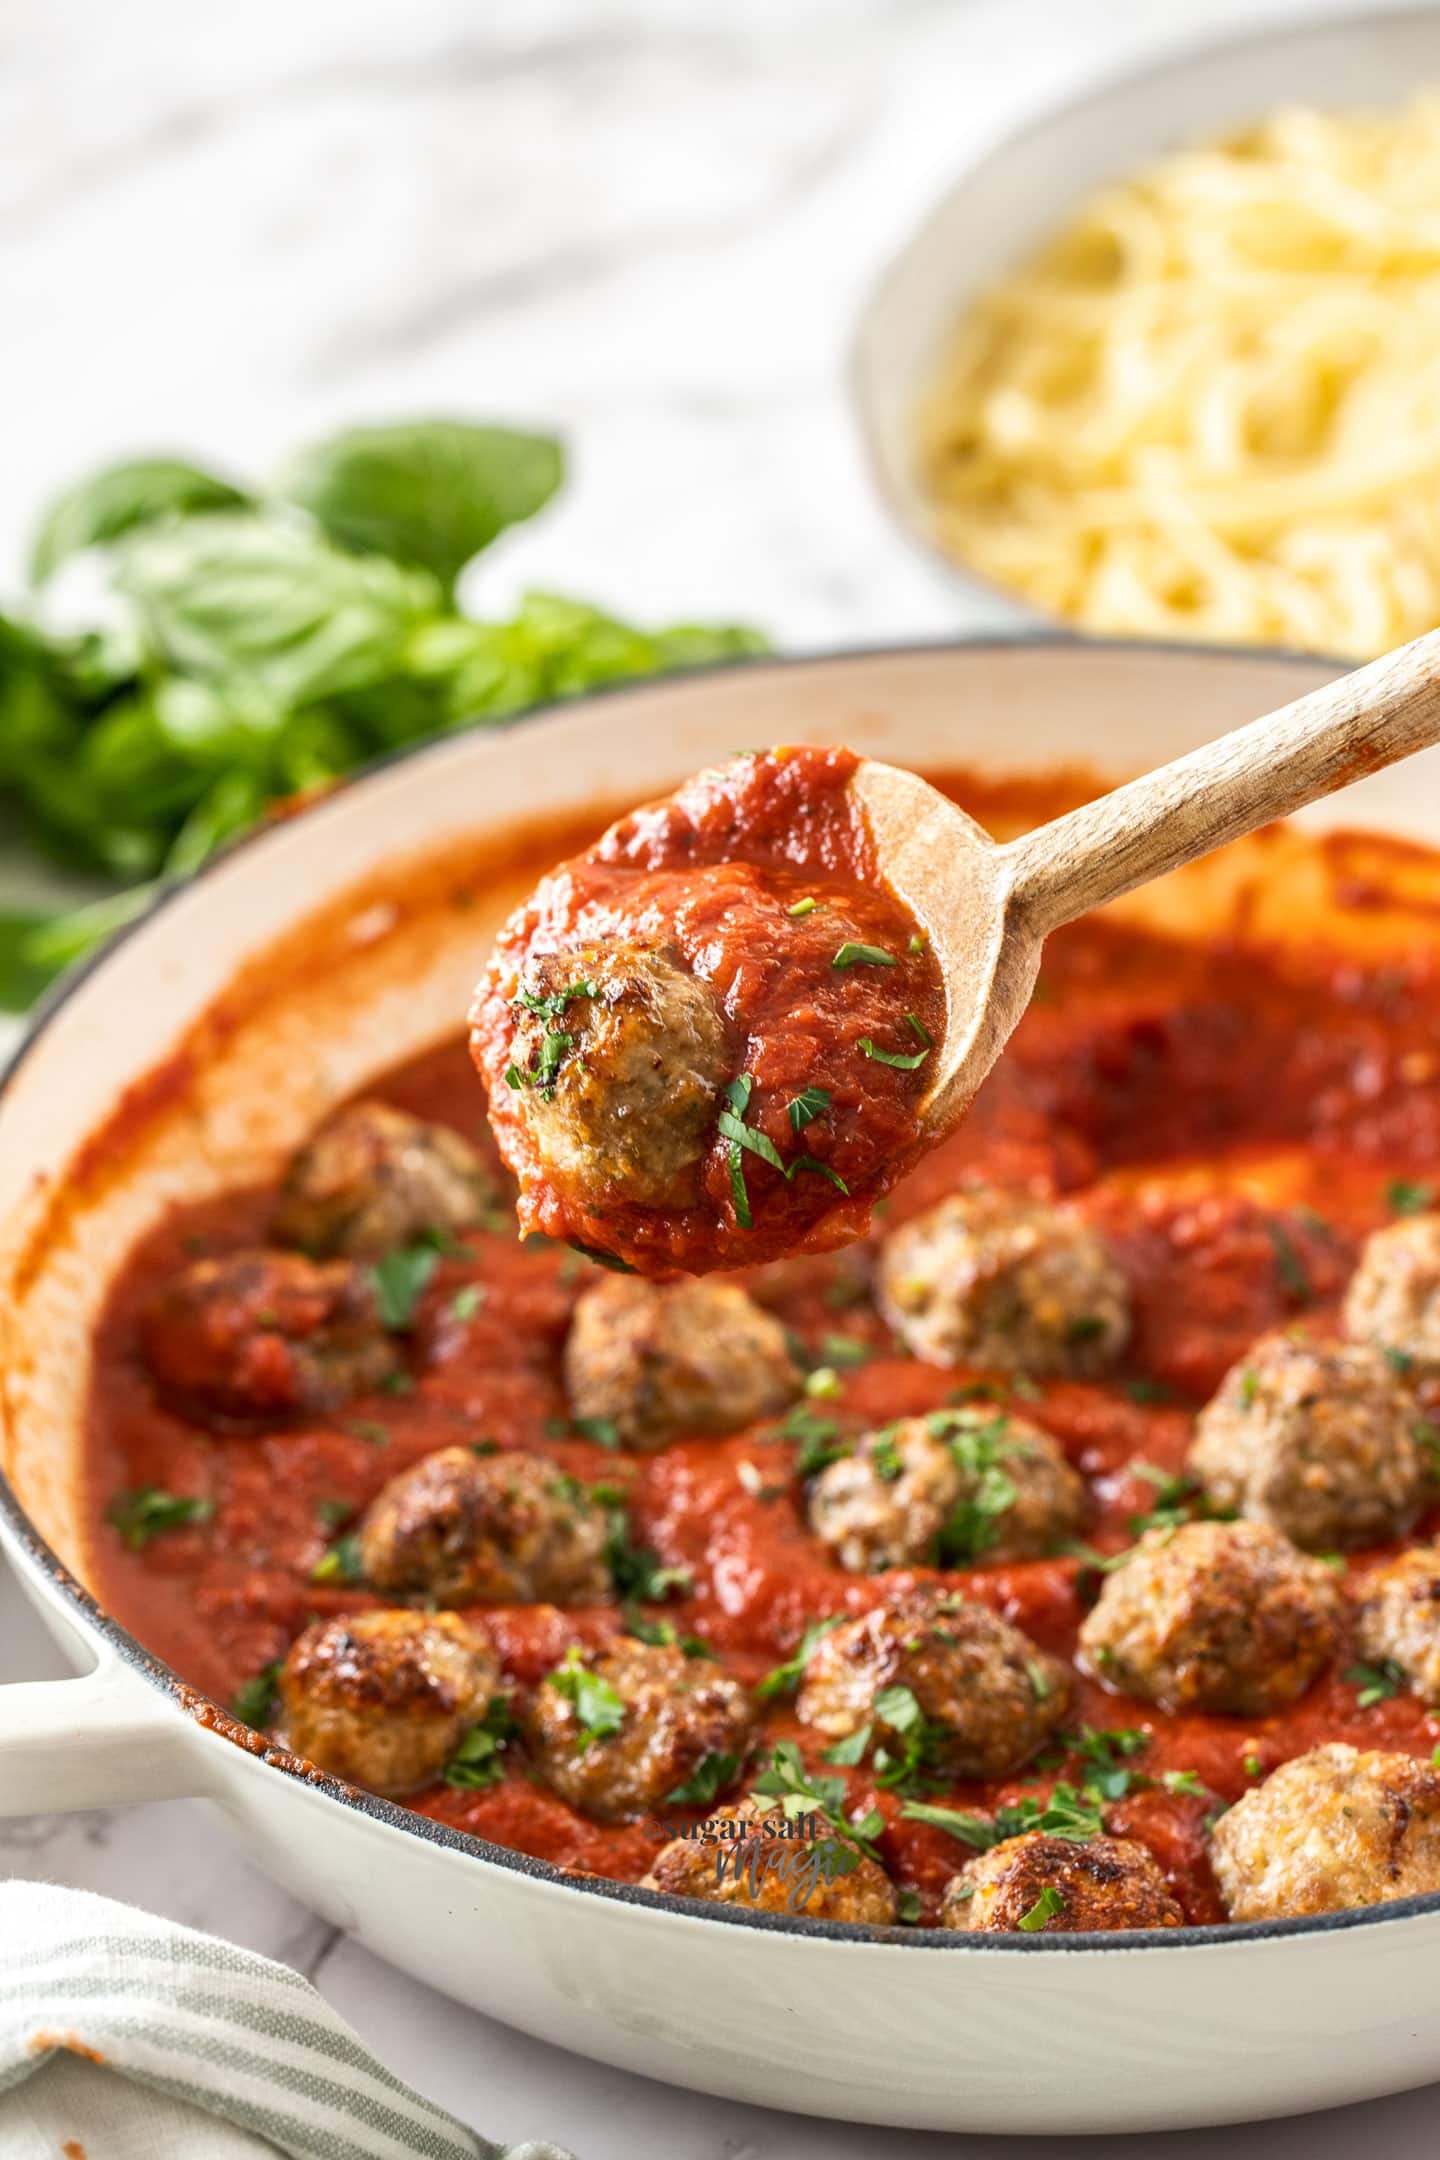 A meatball in red sauce on a wooden spoon.